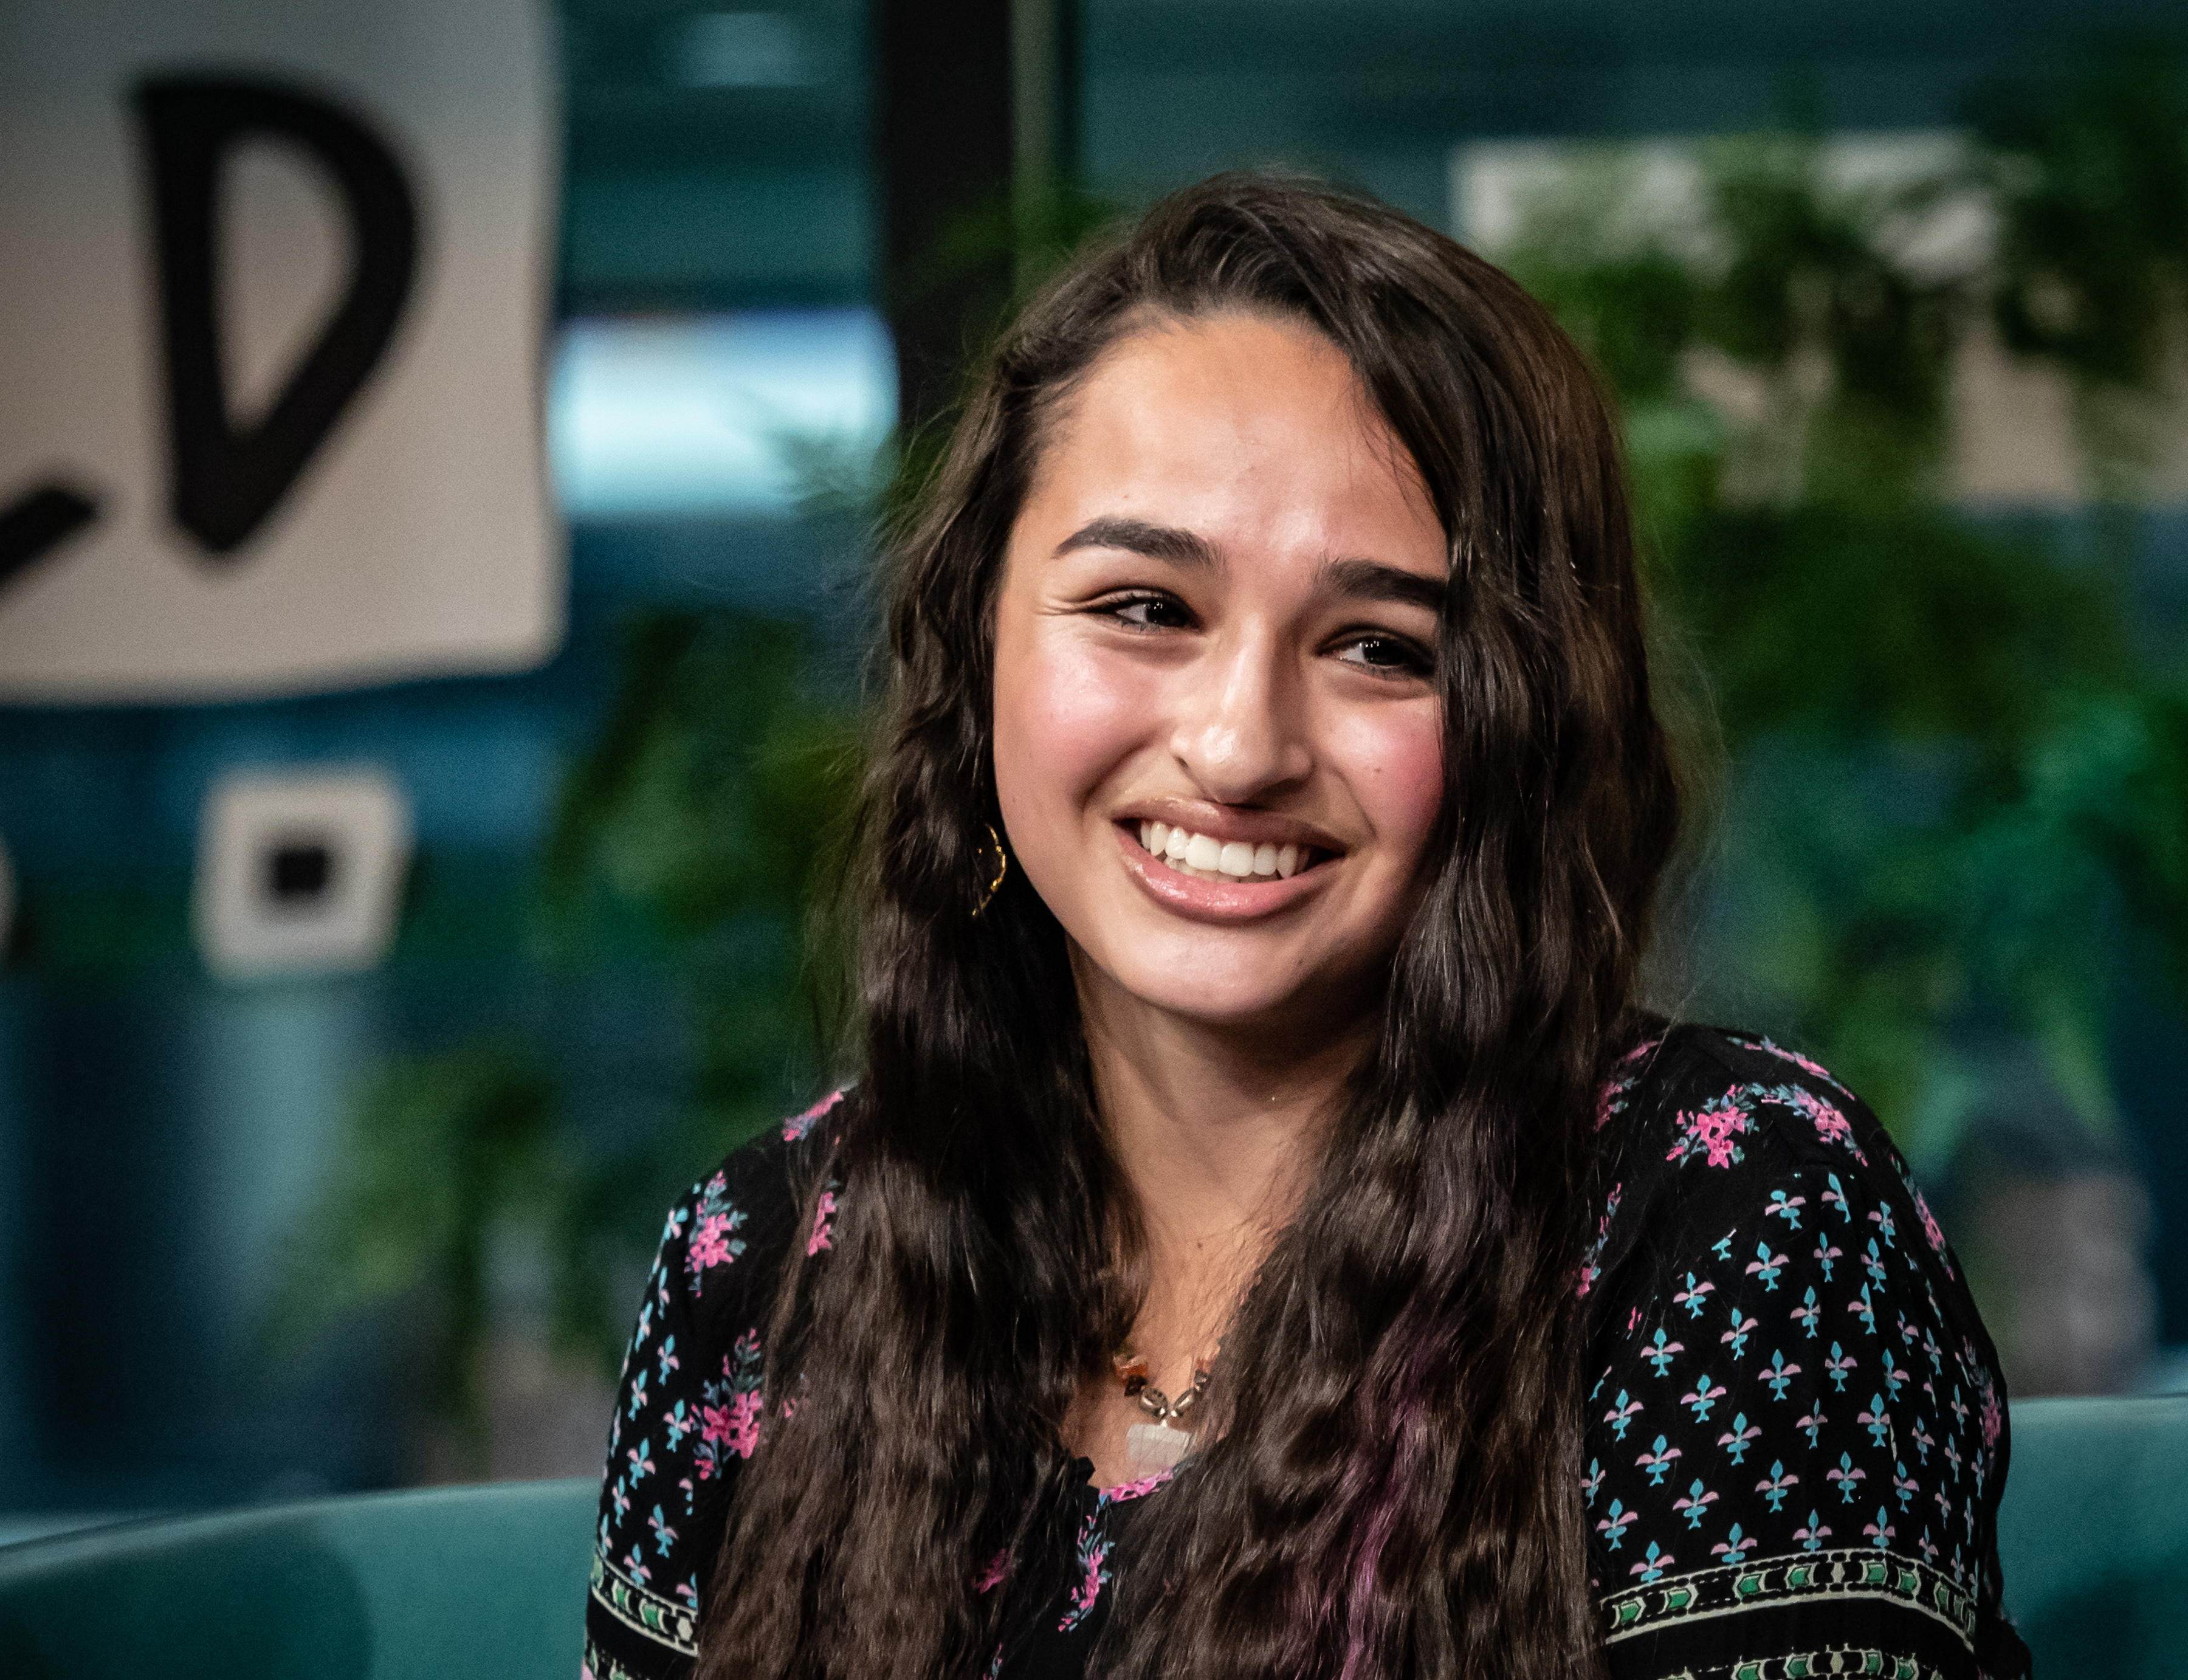 Jazz Jennings, a YouTube personality, spokesmodel, television personality and LGBT activist